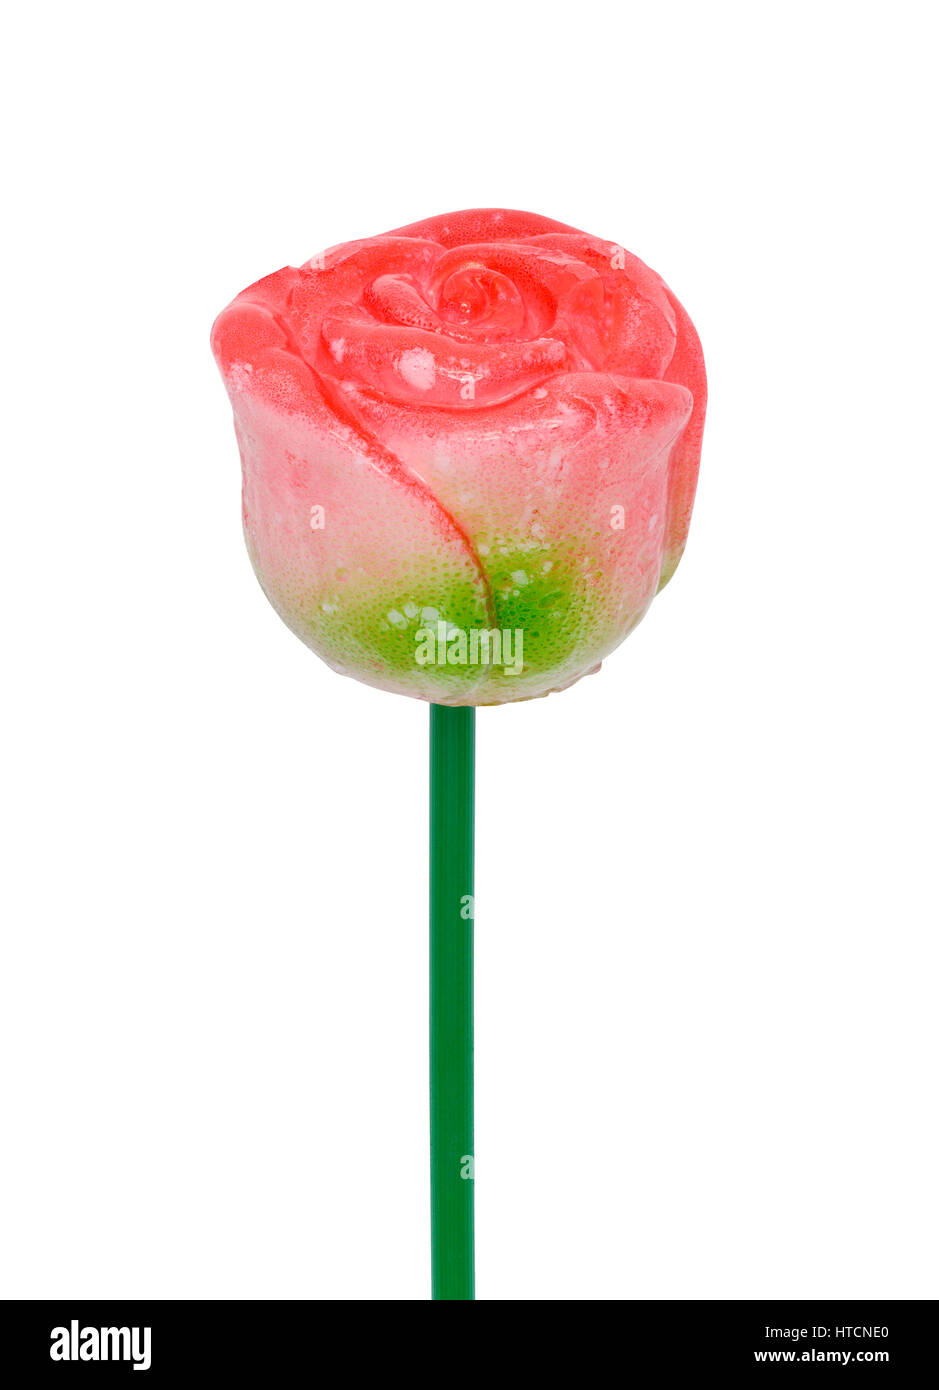 Candy Rose Lollipop Isolated on White Background. Stock Photo